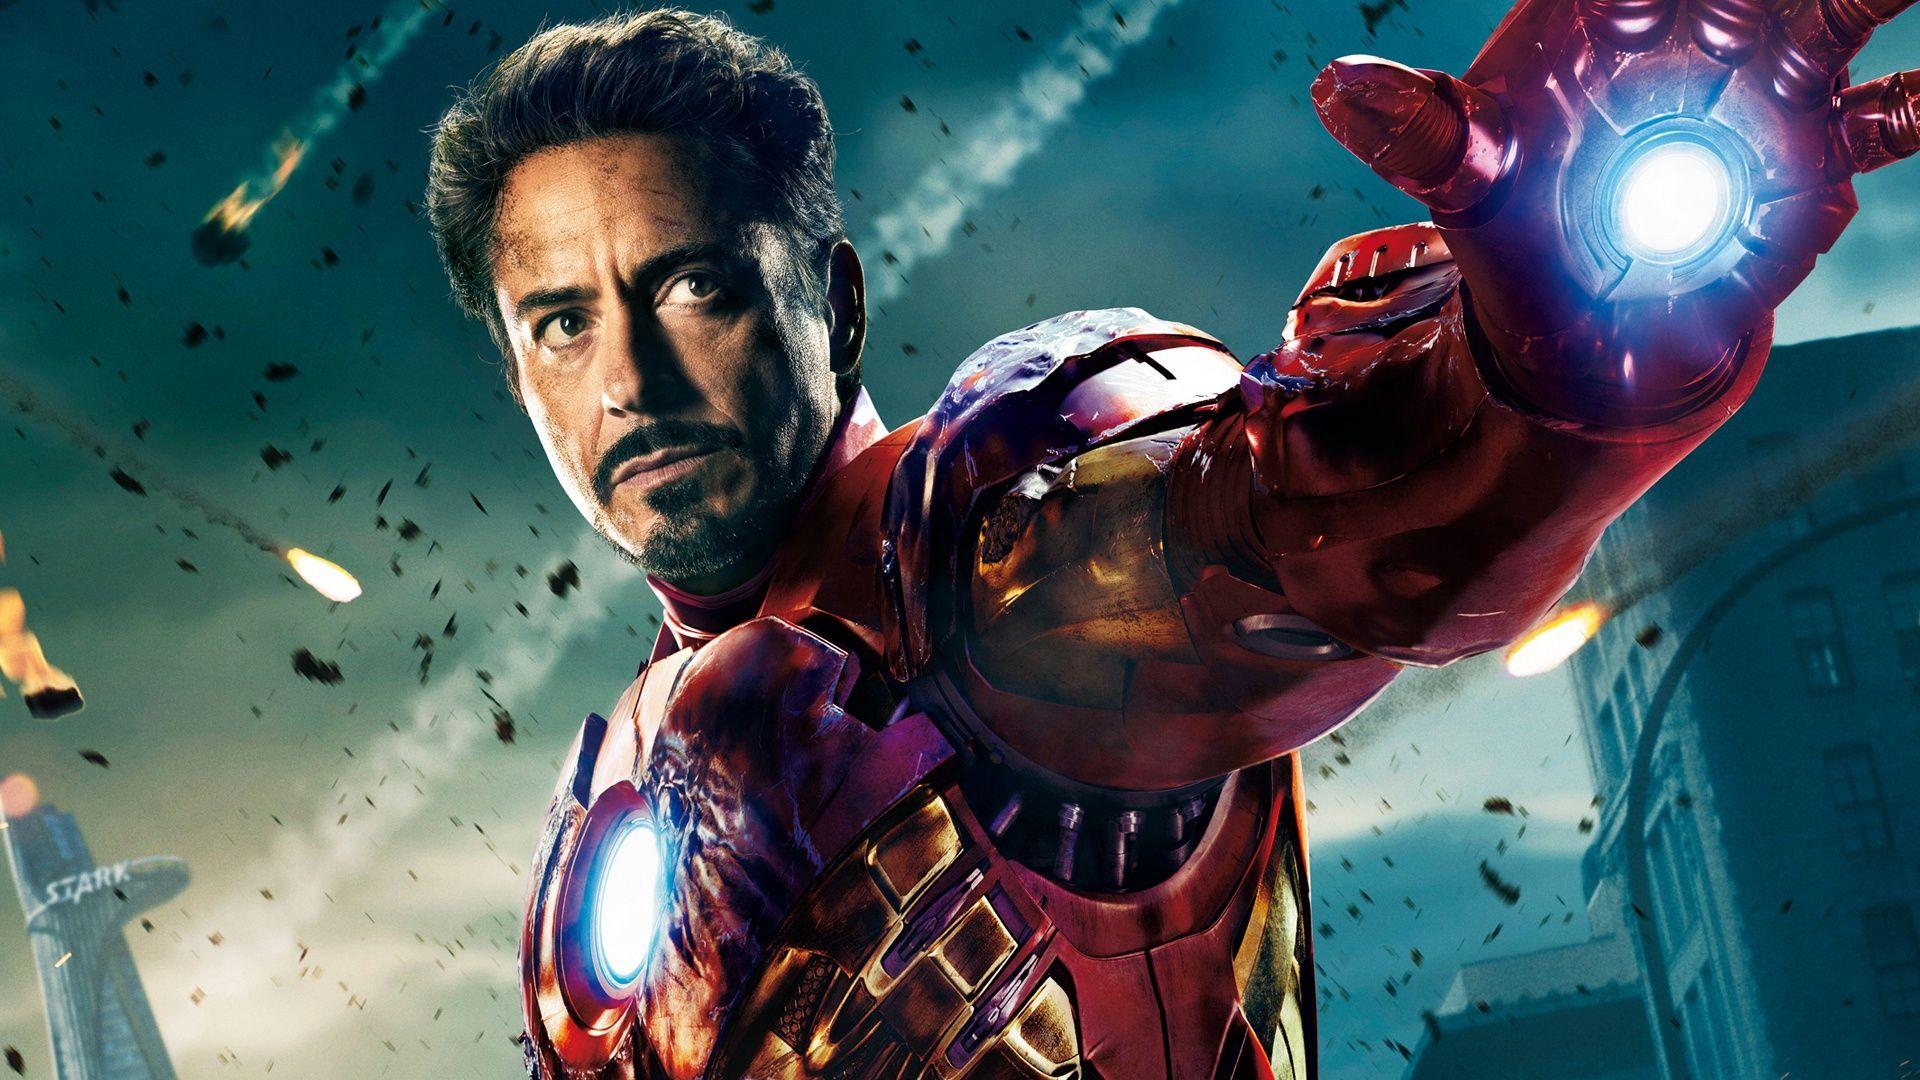 Desktop Iron Man On 3 Wallpaper Full HD 1920x1080 For Androids